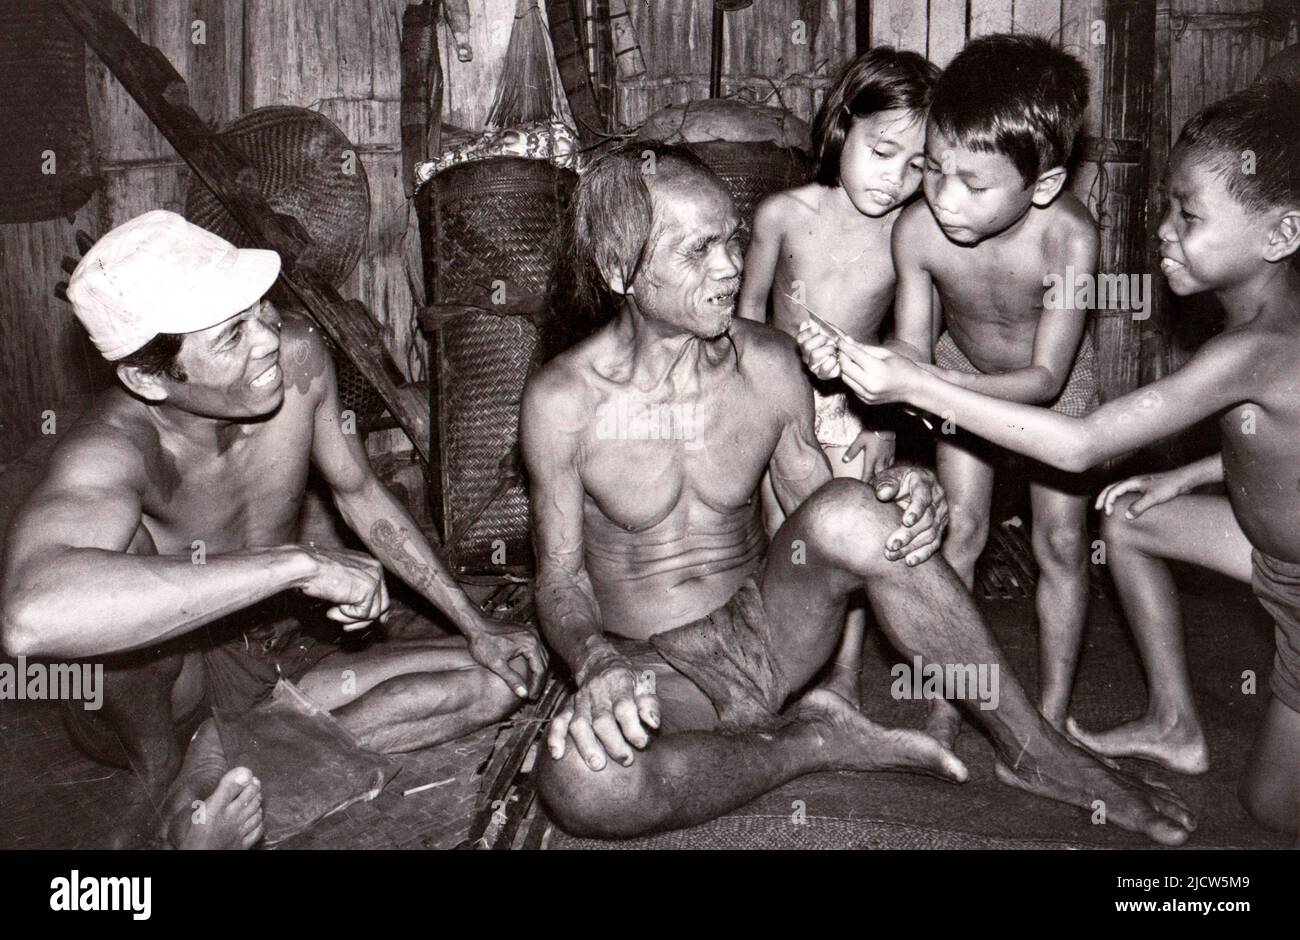 Old Dyak man in a longhouse and children look at a polaroid photo of themselves, Sarawak, East Malaysia, 1975 Stock Photo